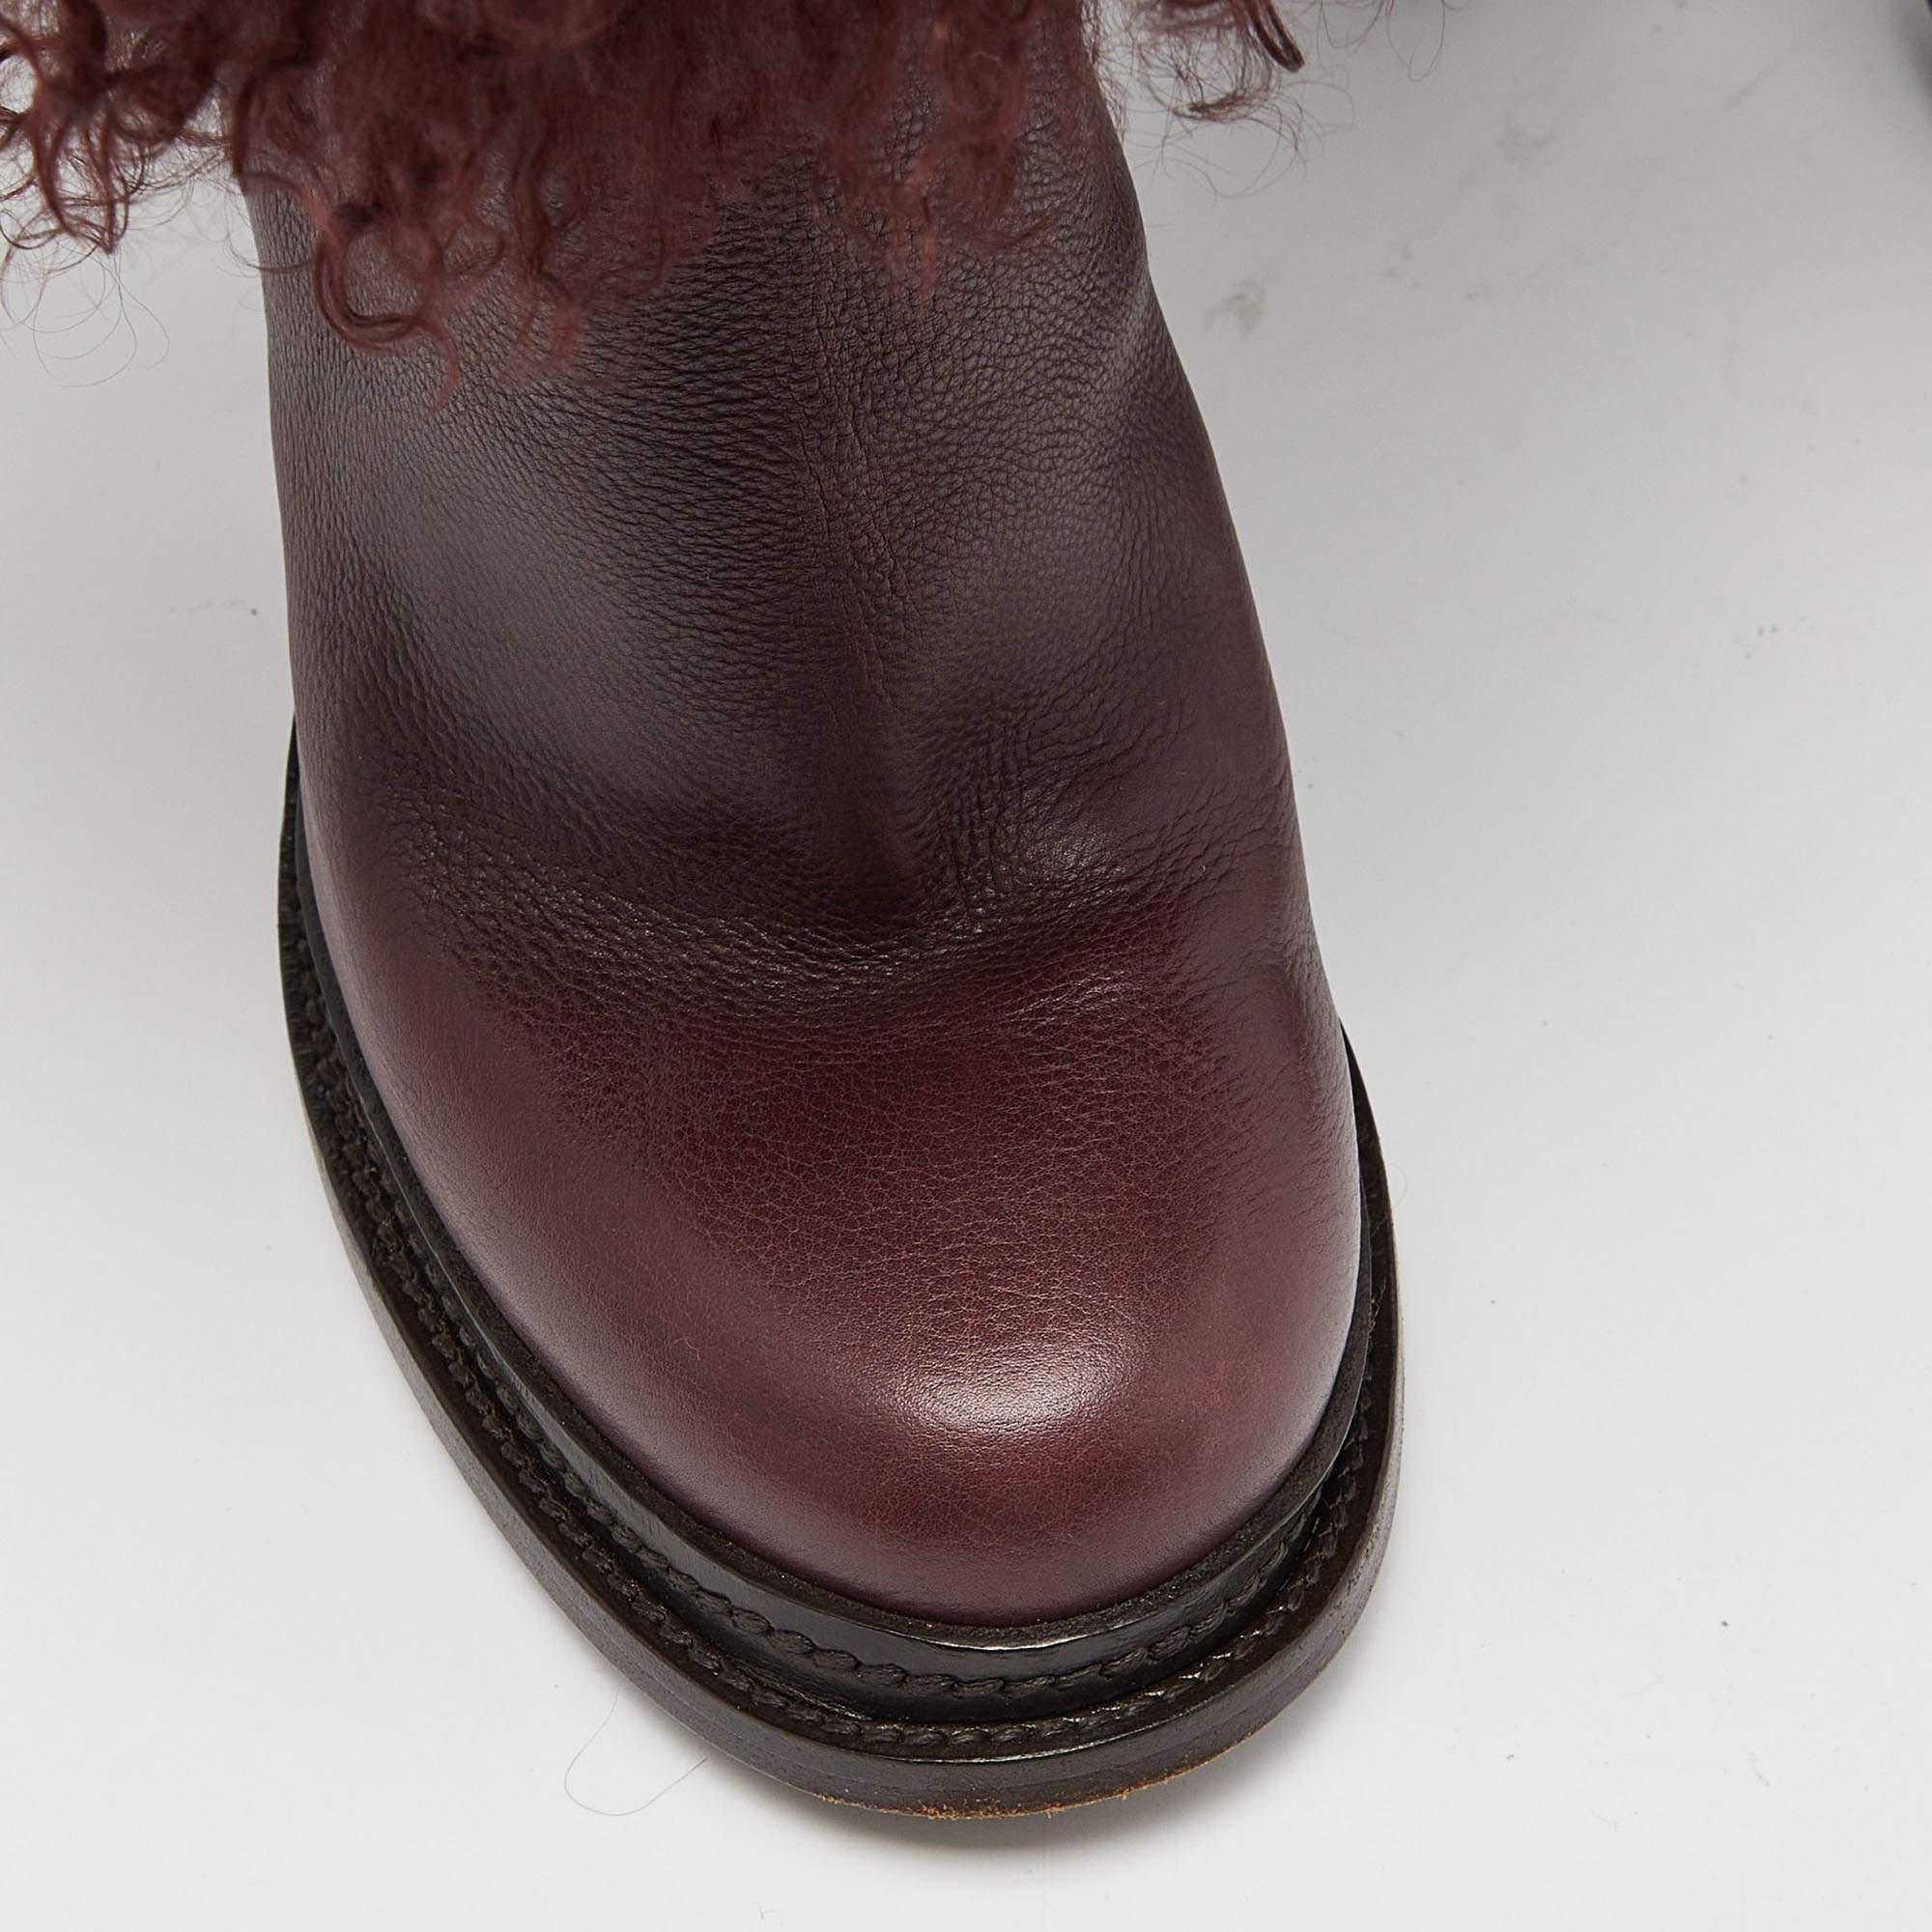 Dolce & Gabbana Burgundy Fur and Leather Calf Length Boots  In Good Condition For Sale In Dubai, Al Qouz 2